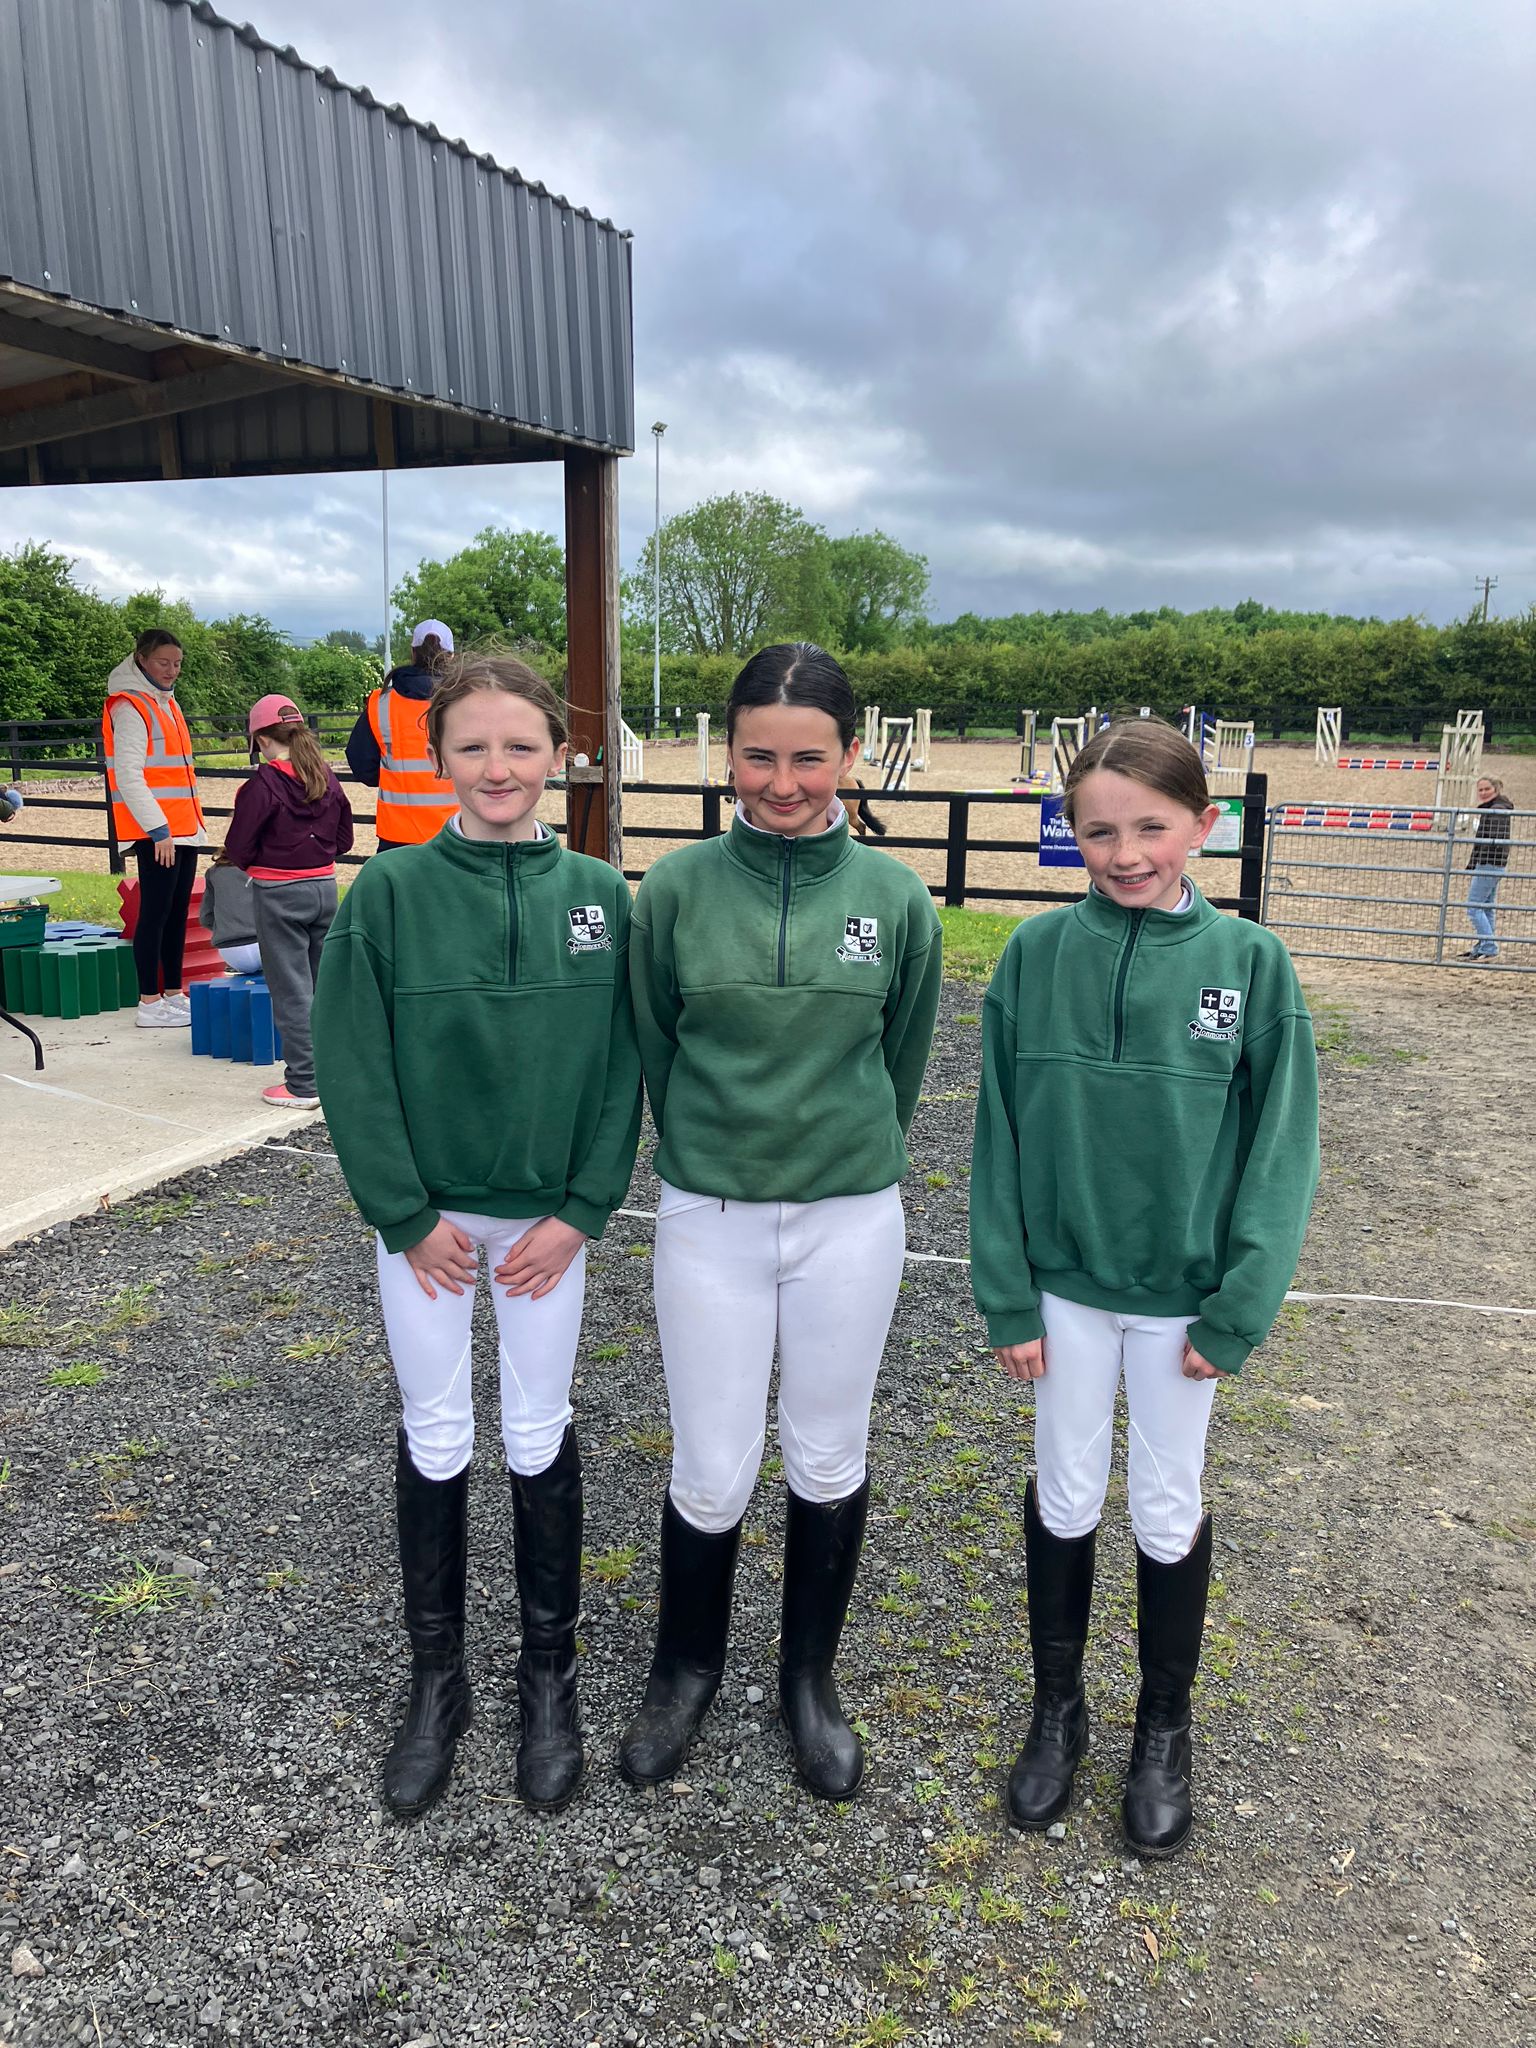 Our Show Jumping Girls!